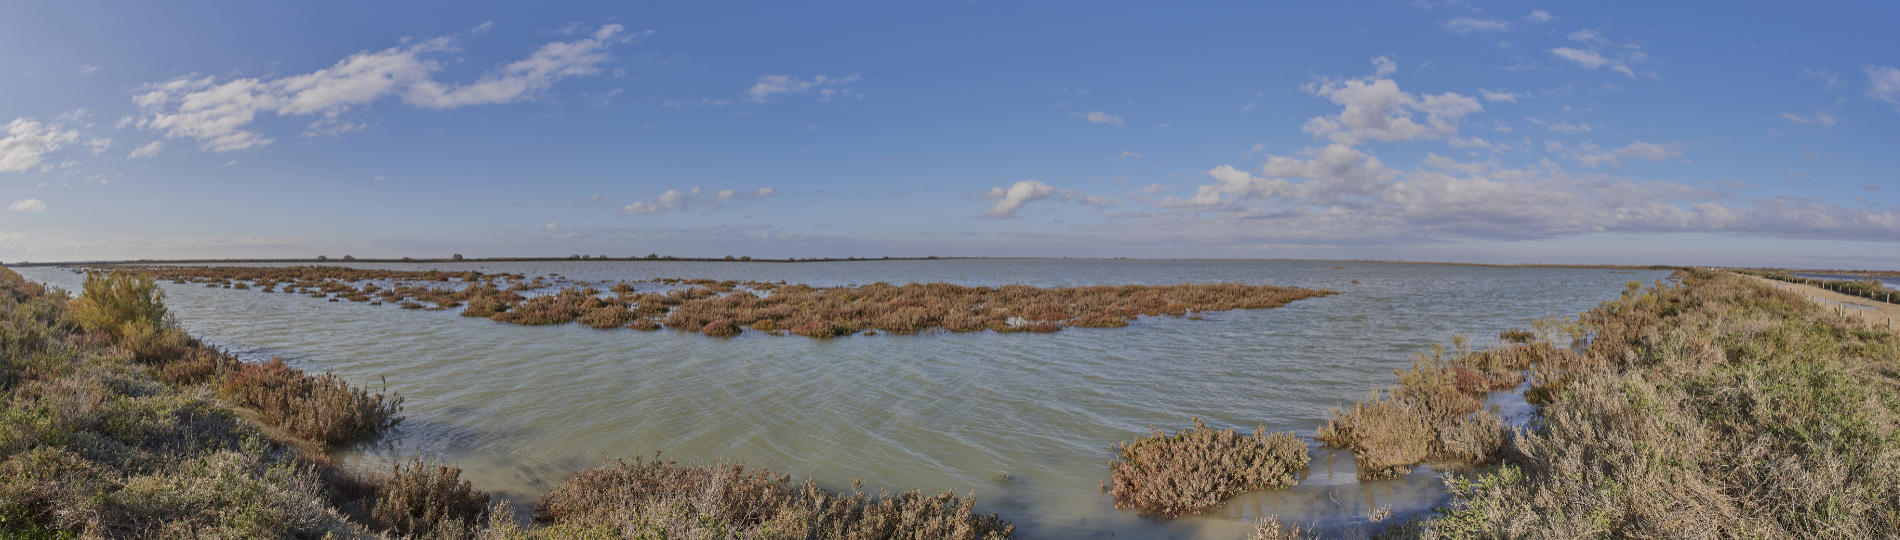 Panorama on the ponds - Camargue